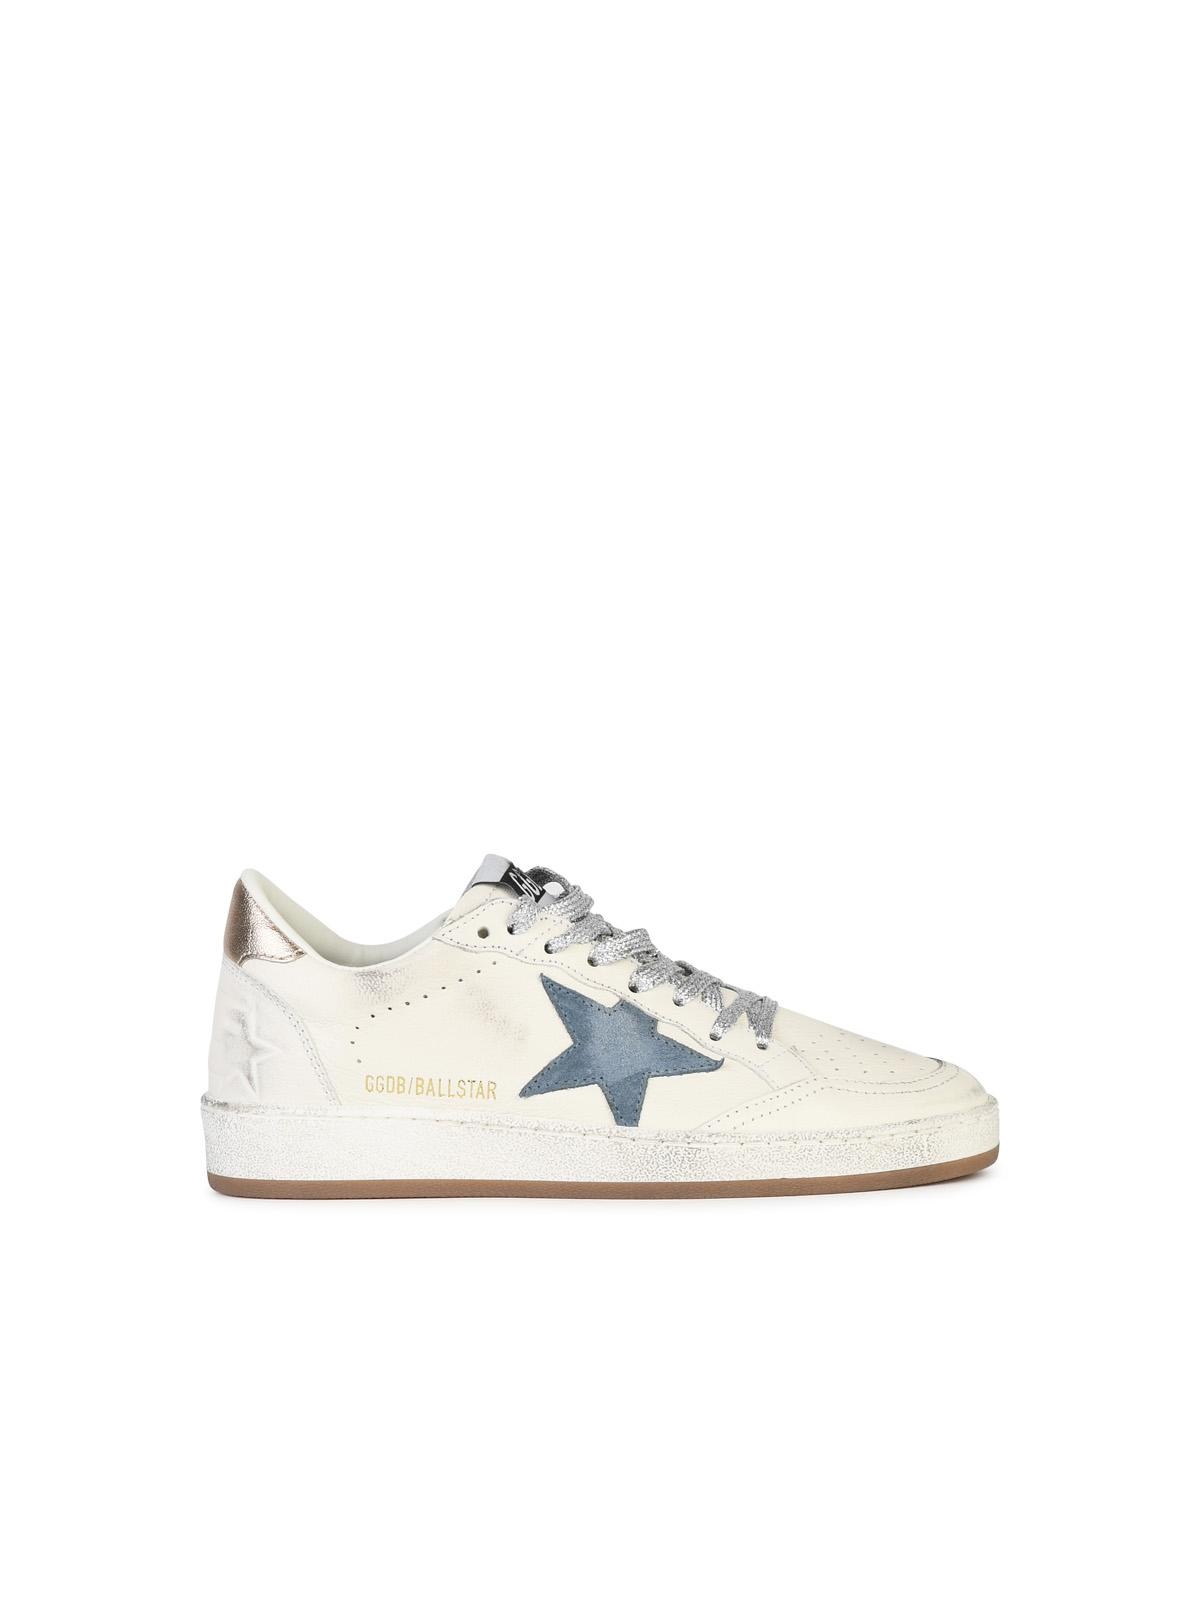 Golden Goose 'Ball Star' White Leather Sneakers Woman - 1